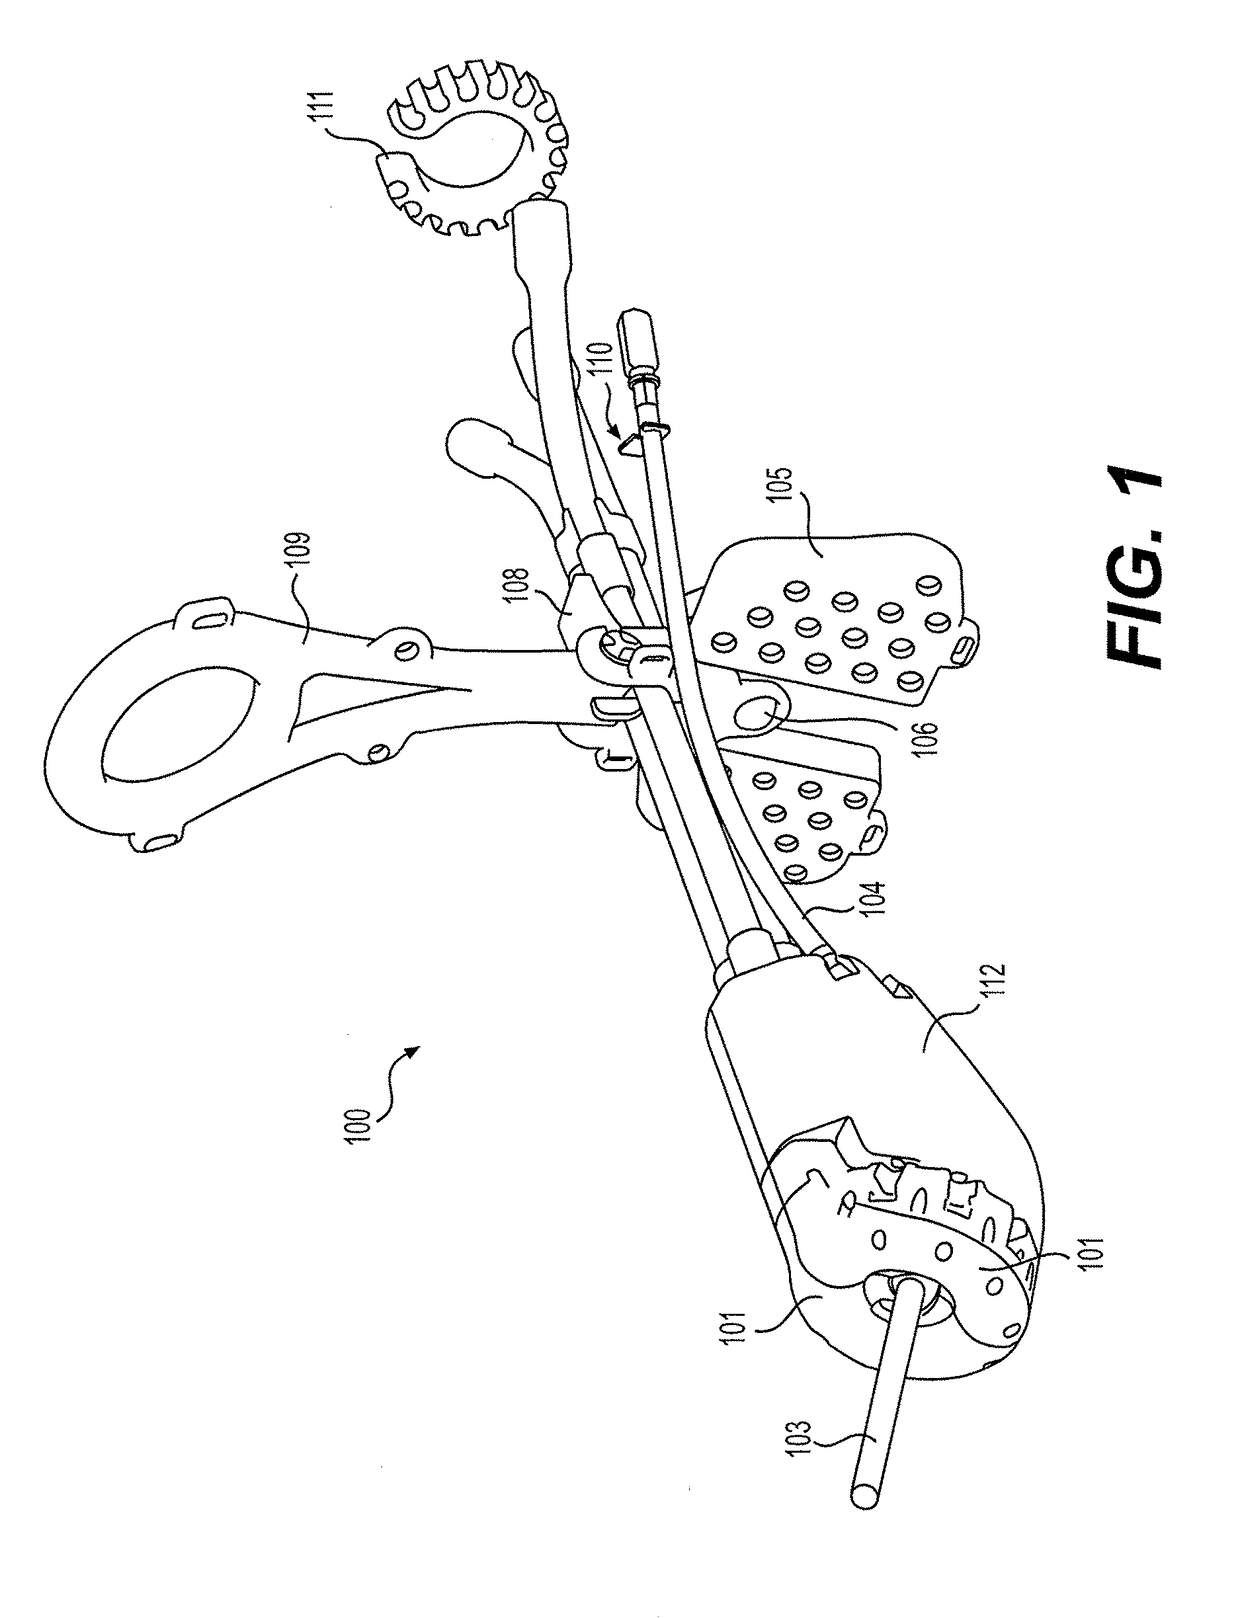 Advanced applicator systems and methods